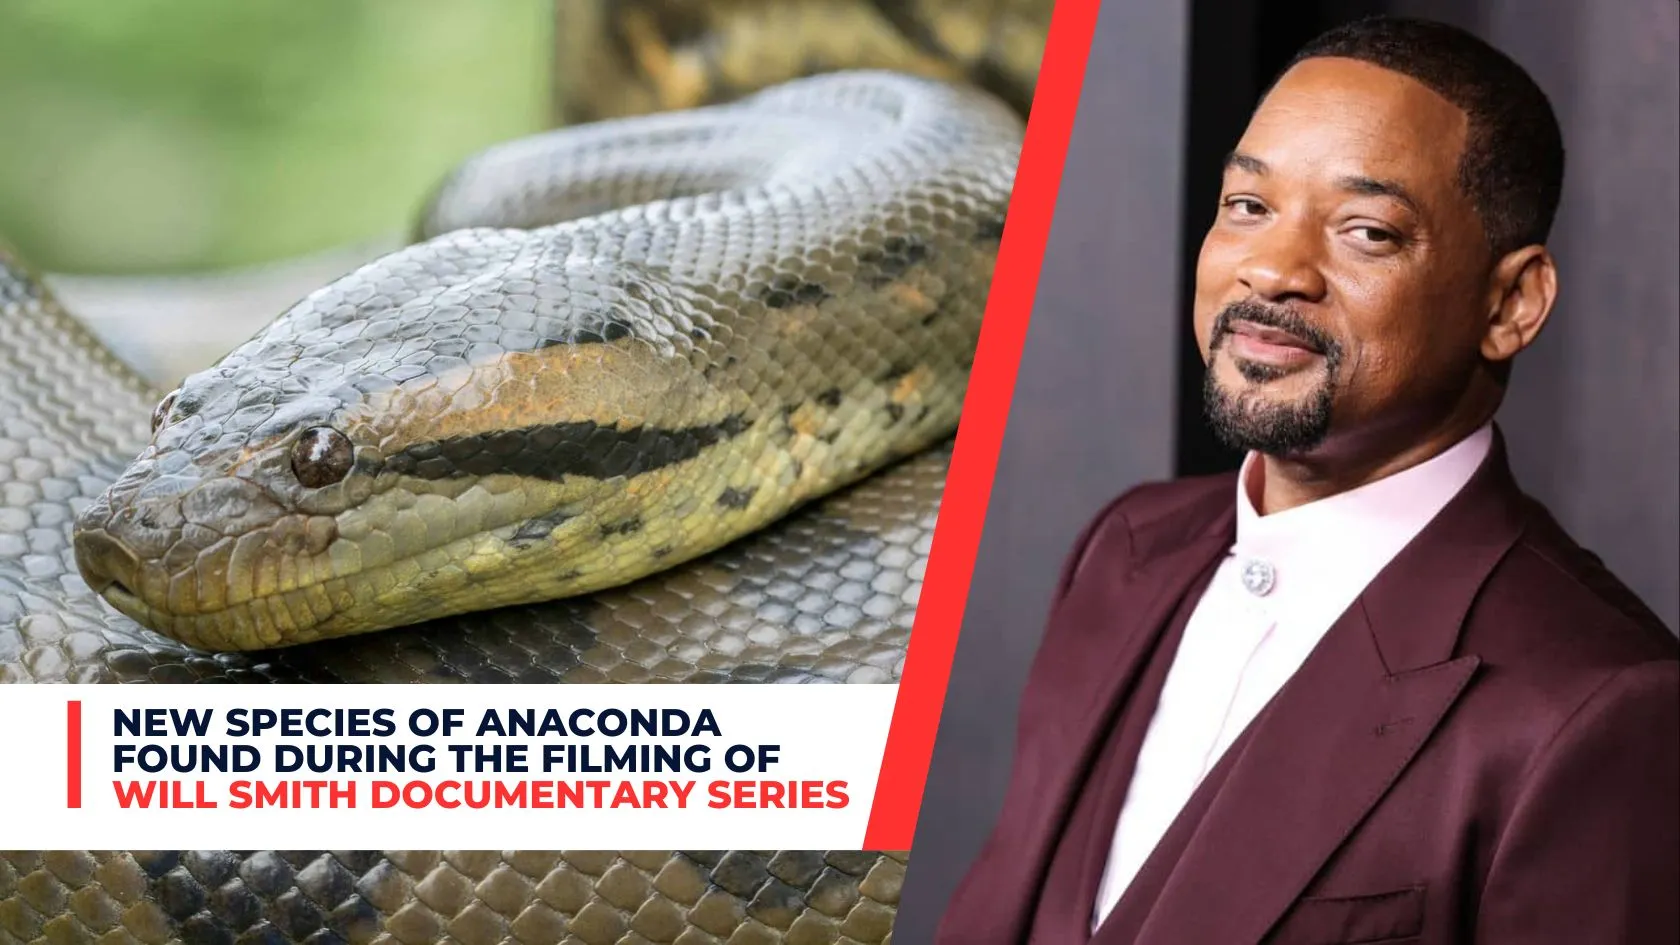 New Species of Anaconda Found During the Filming of Will Smith Documentary